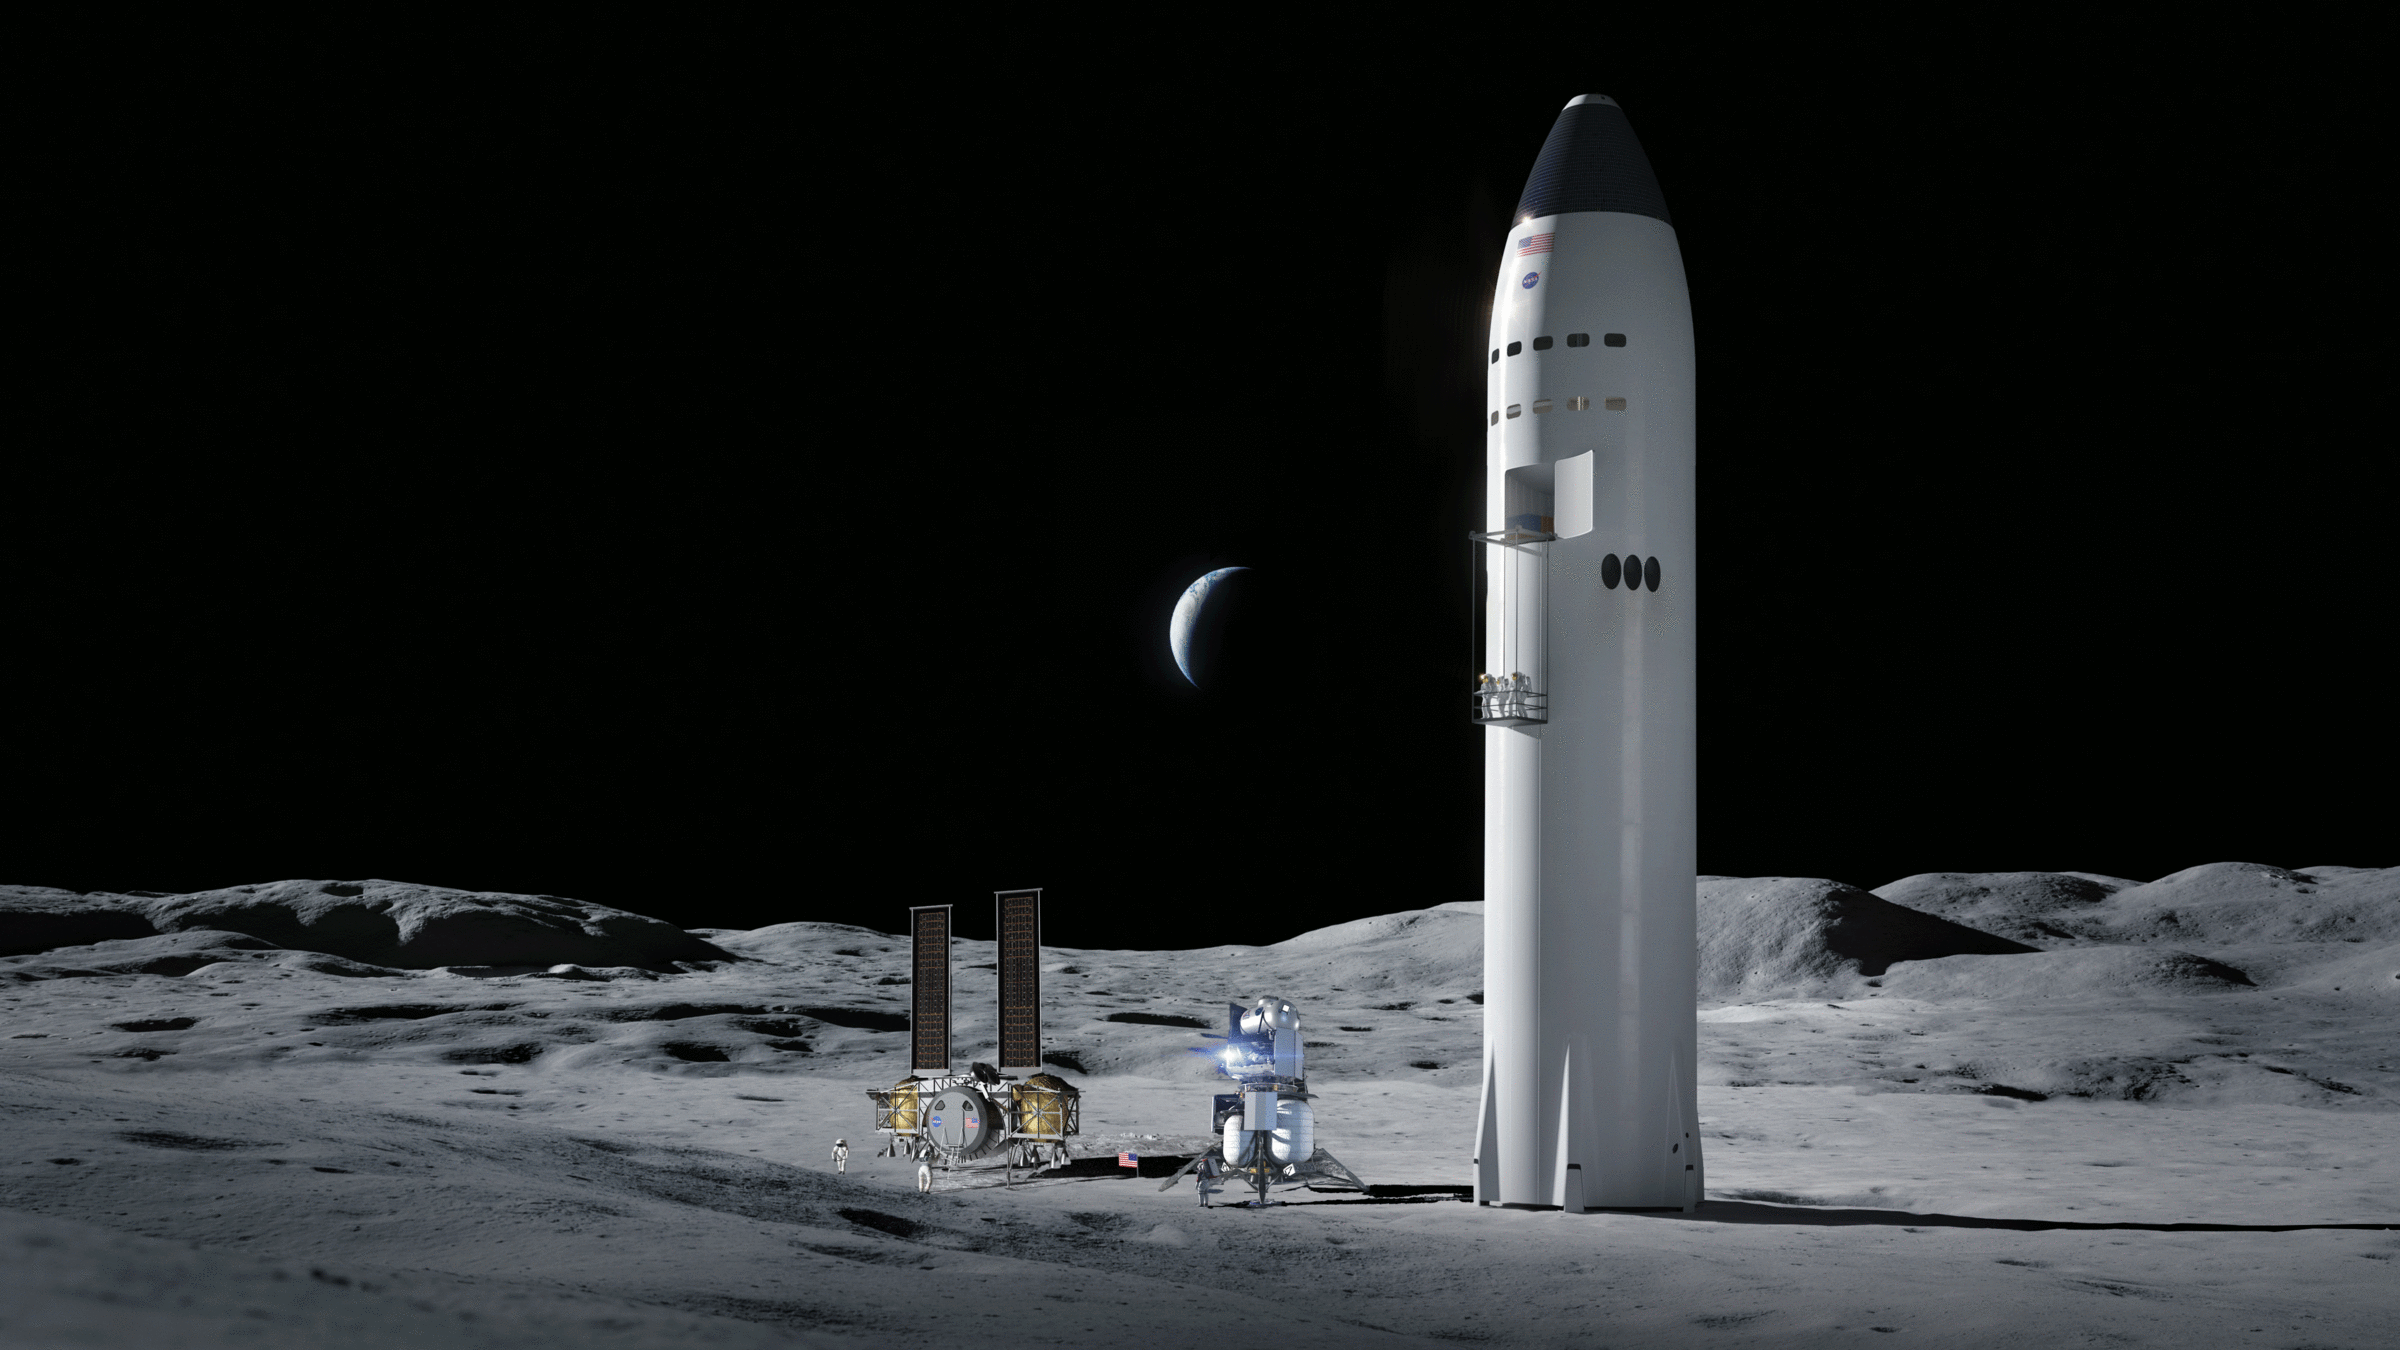 U.S. Senate Wants NASA To Select Two Companies To Develop Lunar Landers After The Agency Only Selected SpaceX’s Starship